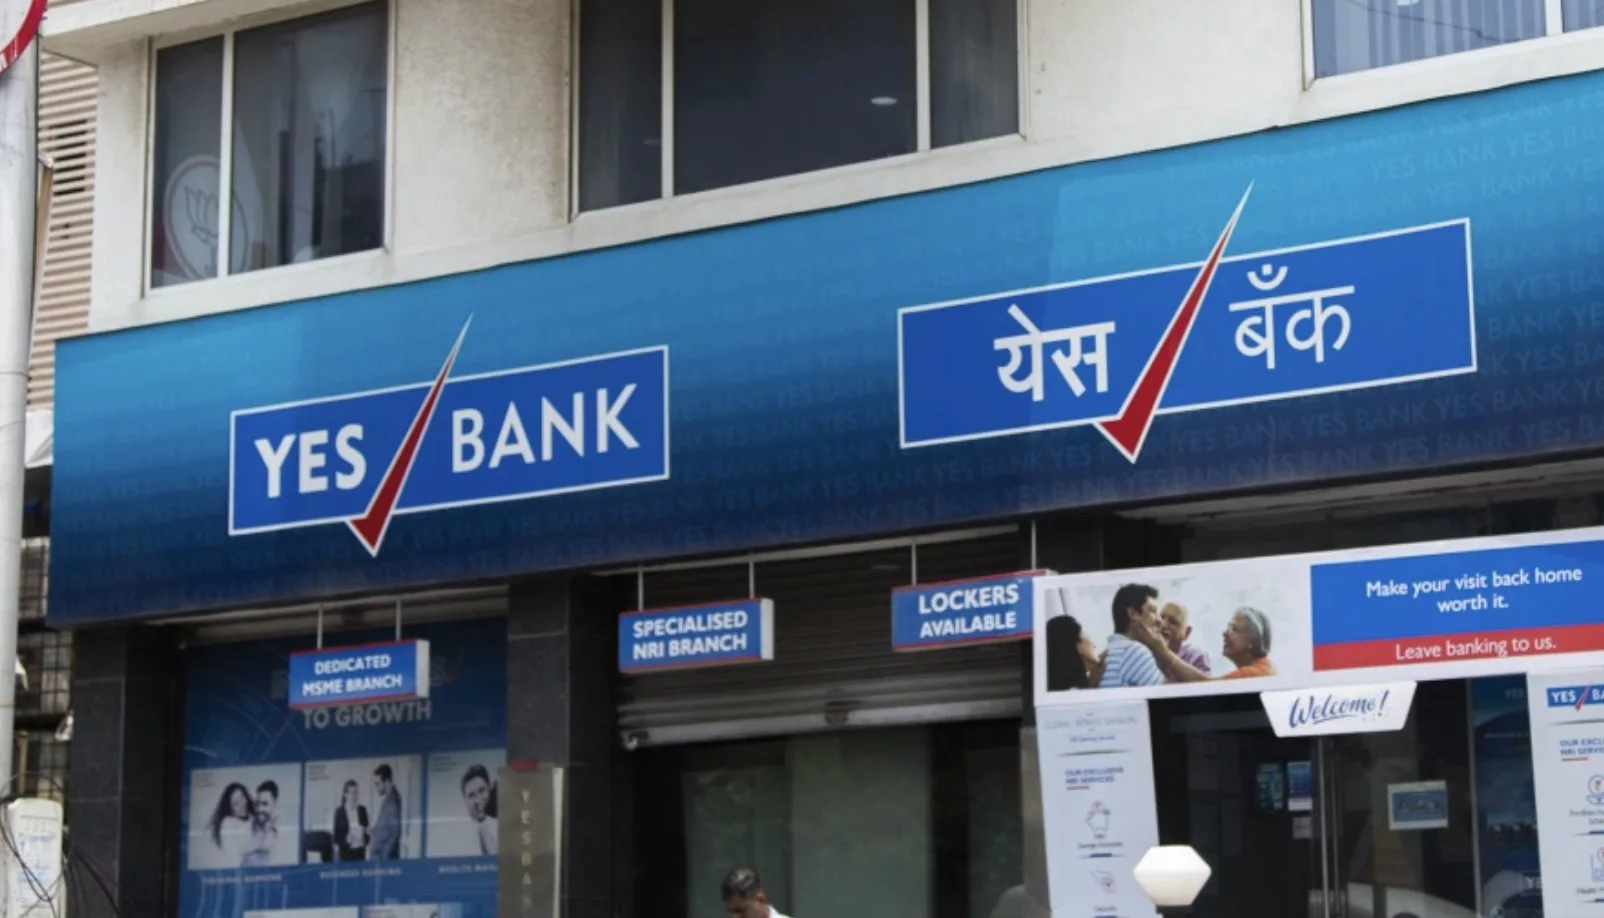 BriskPe with YES BANK